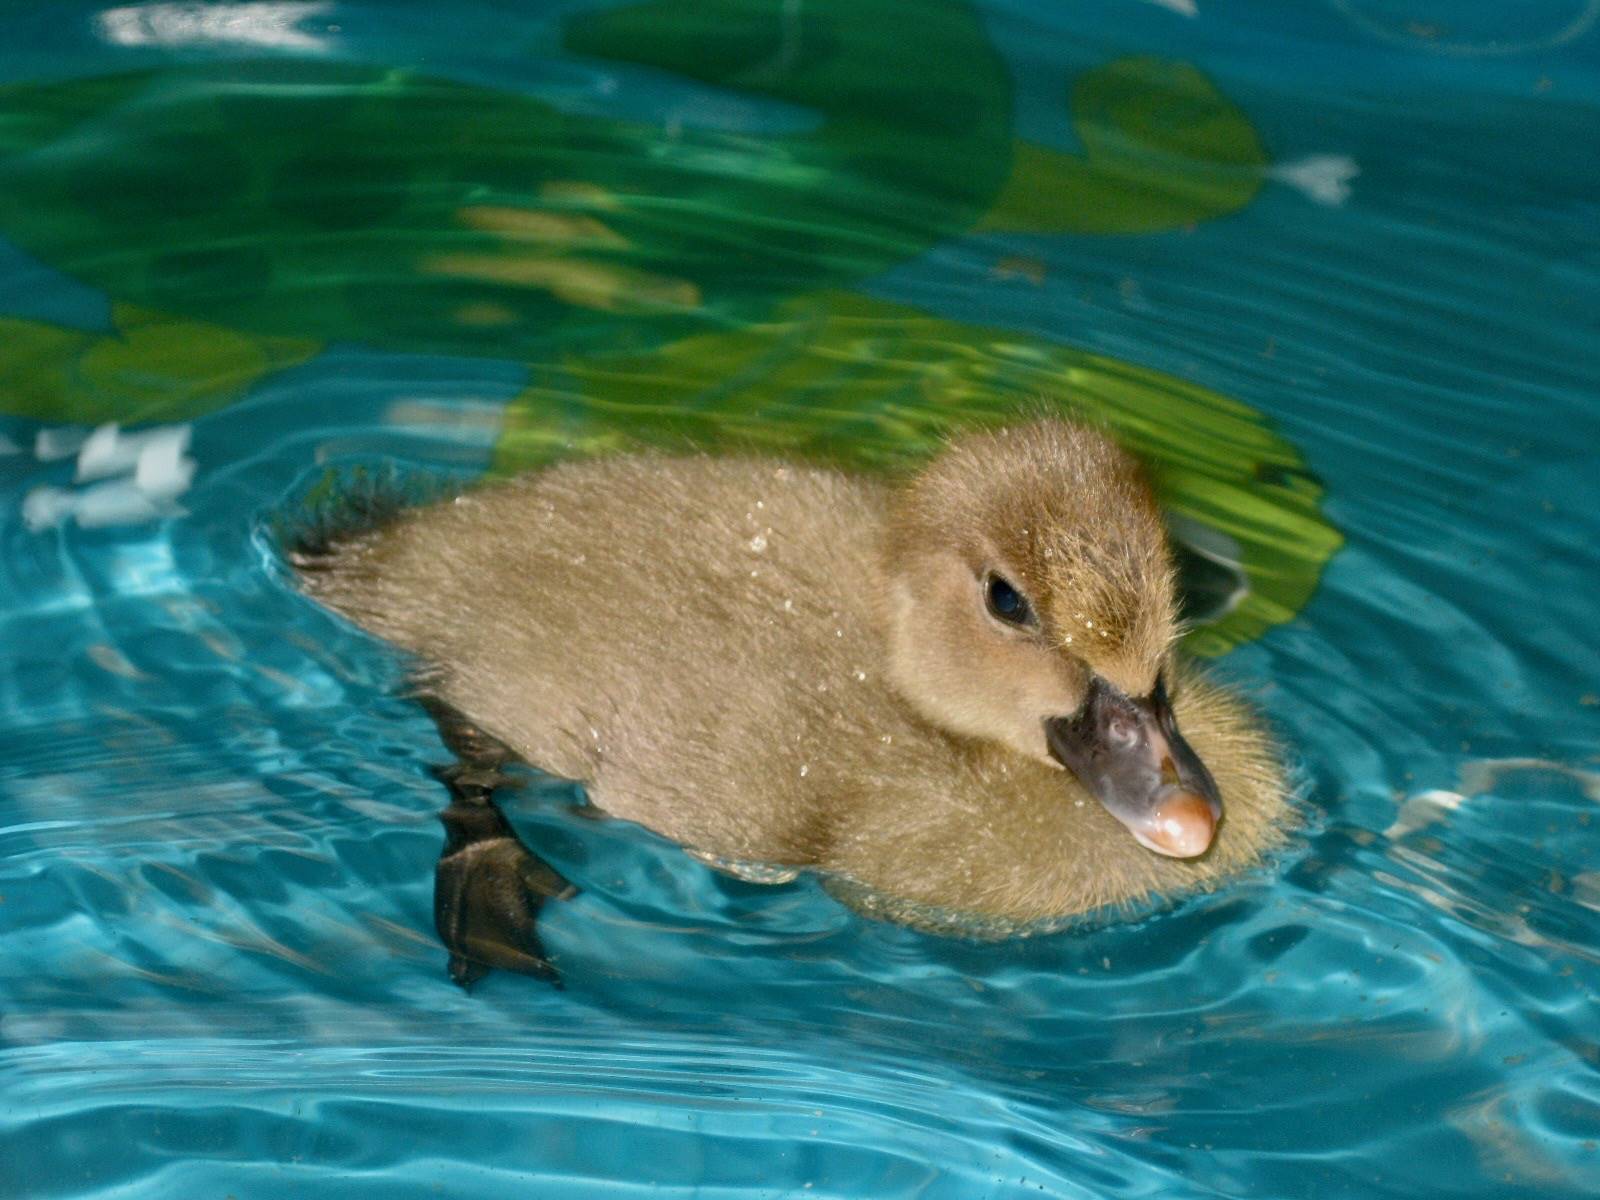 1 duckling swimming in a pool.